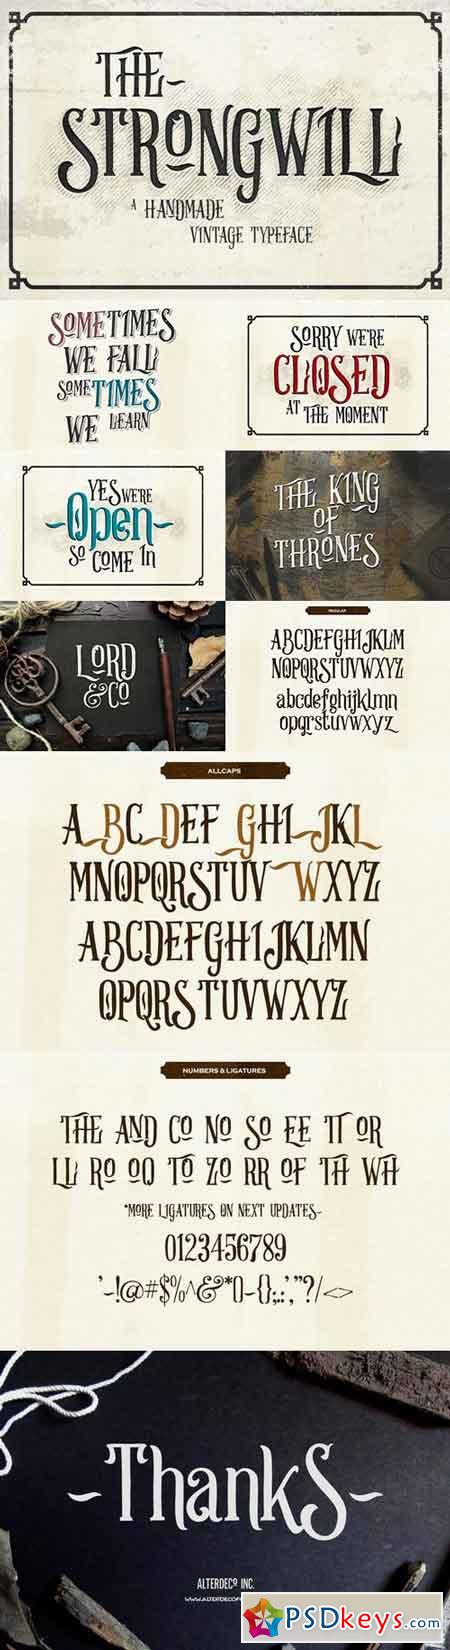 Strongwill Typeface 647806